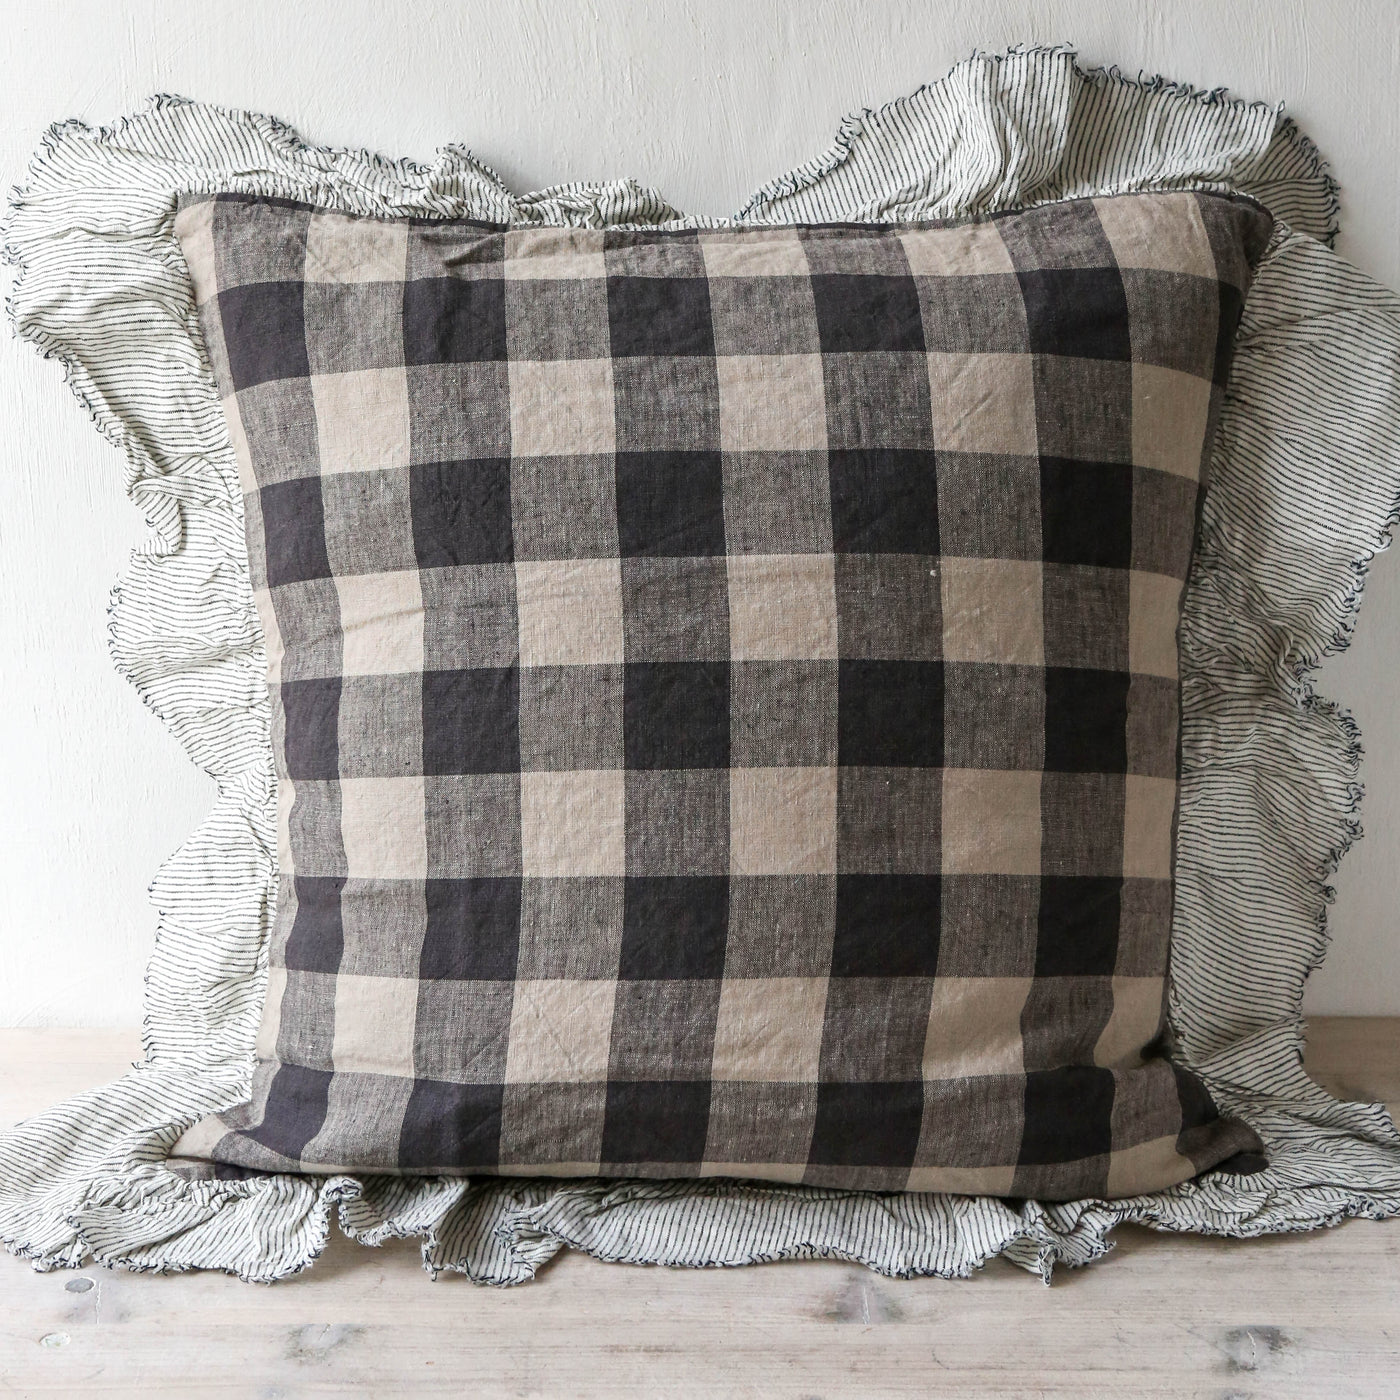 Licorice Gingham Linen Cushion Cover with Ruffle